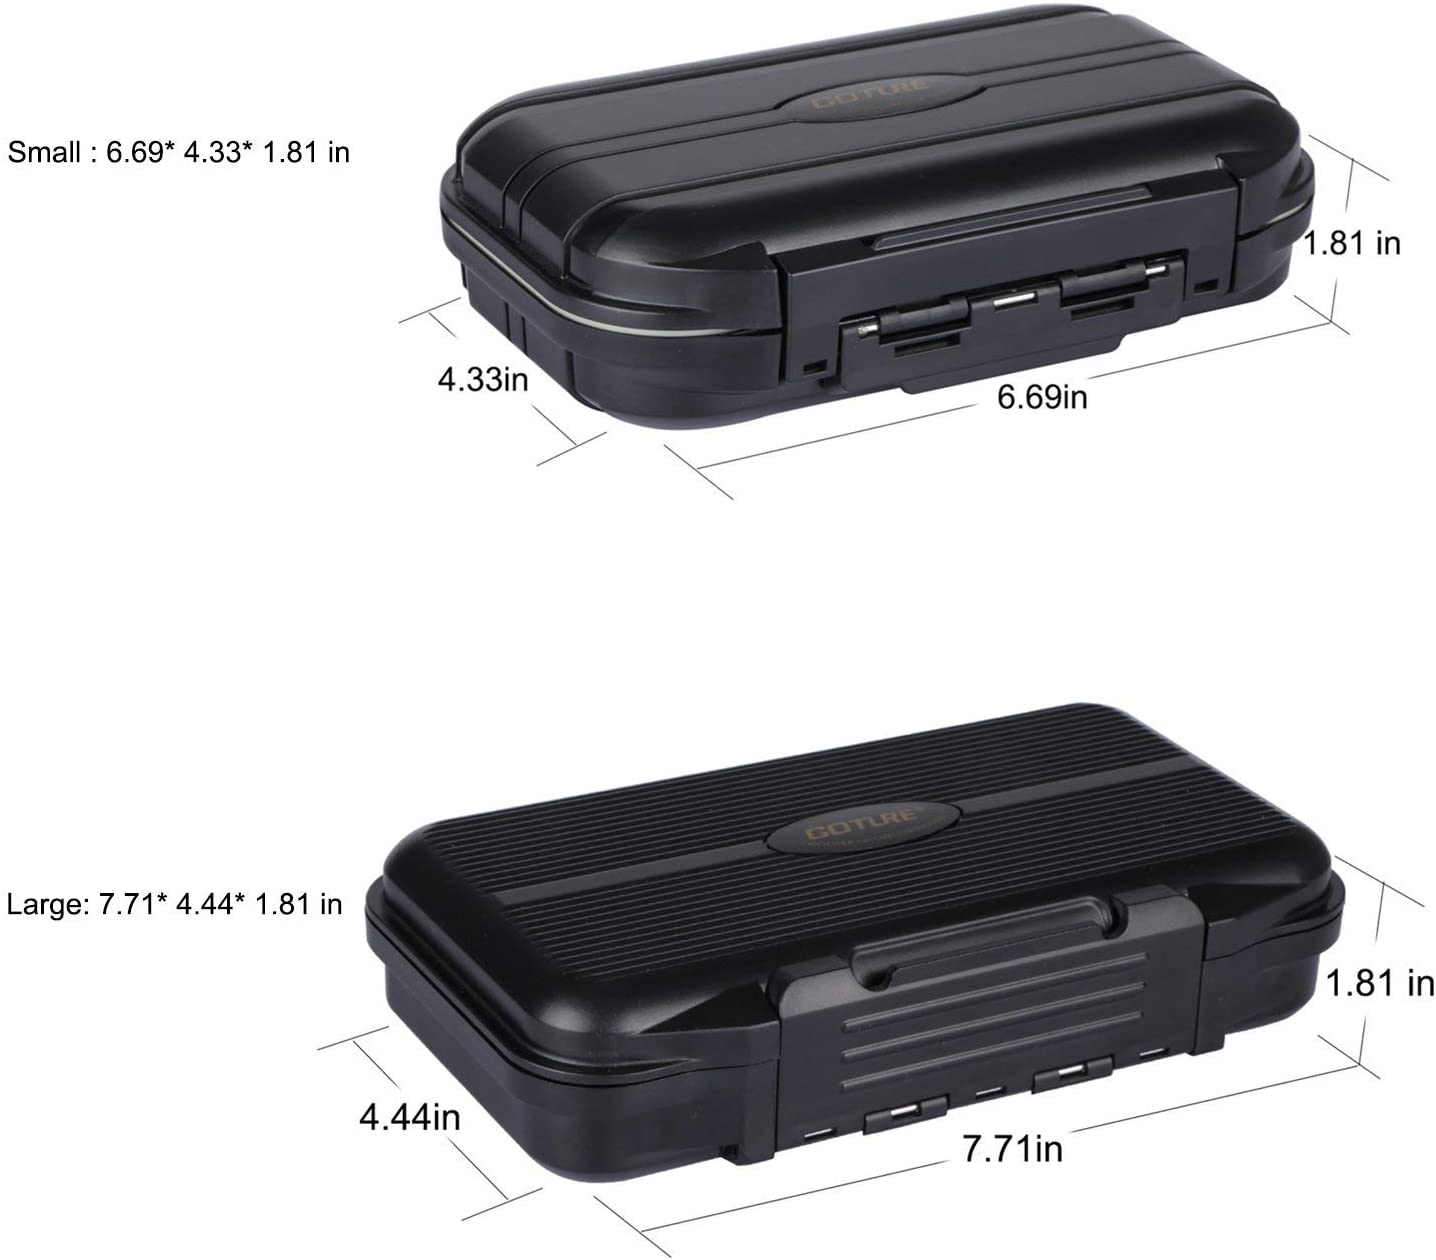 Black Waterproof 2 Sided Adjustable Fishing Lure Tackle Boxes Mini Plastic Storage Case Vest Accessories - GOTURE